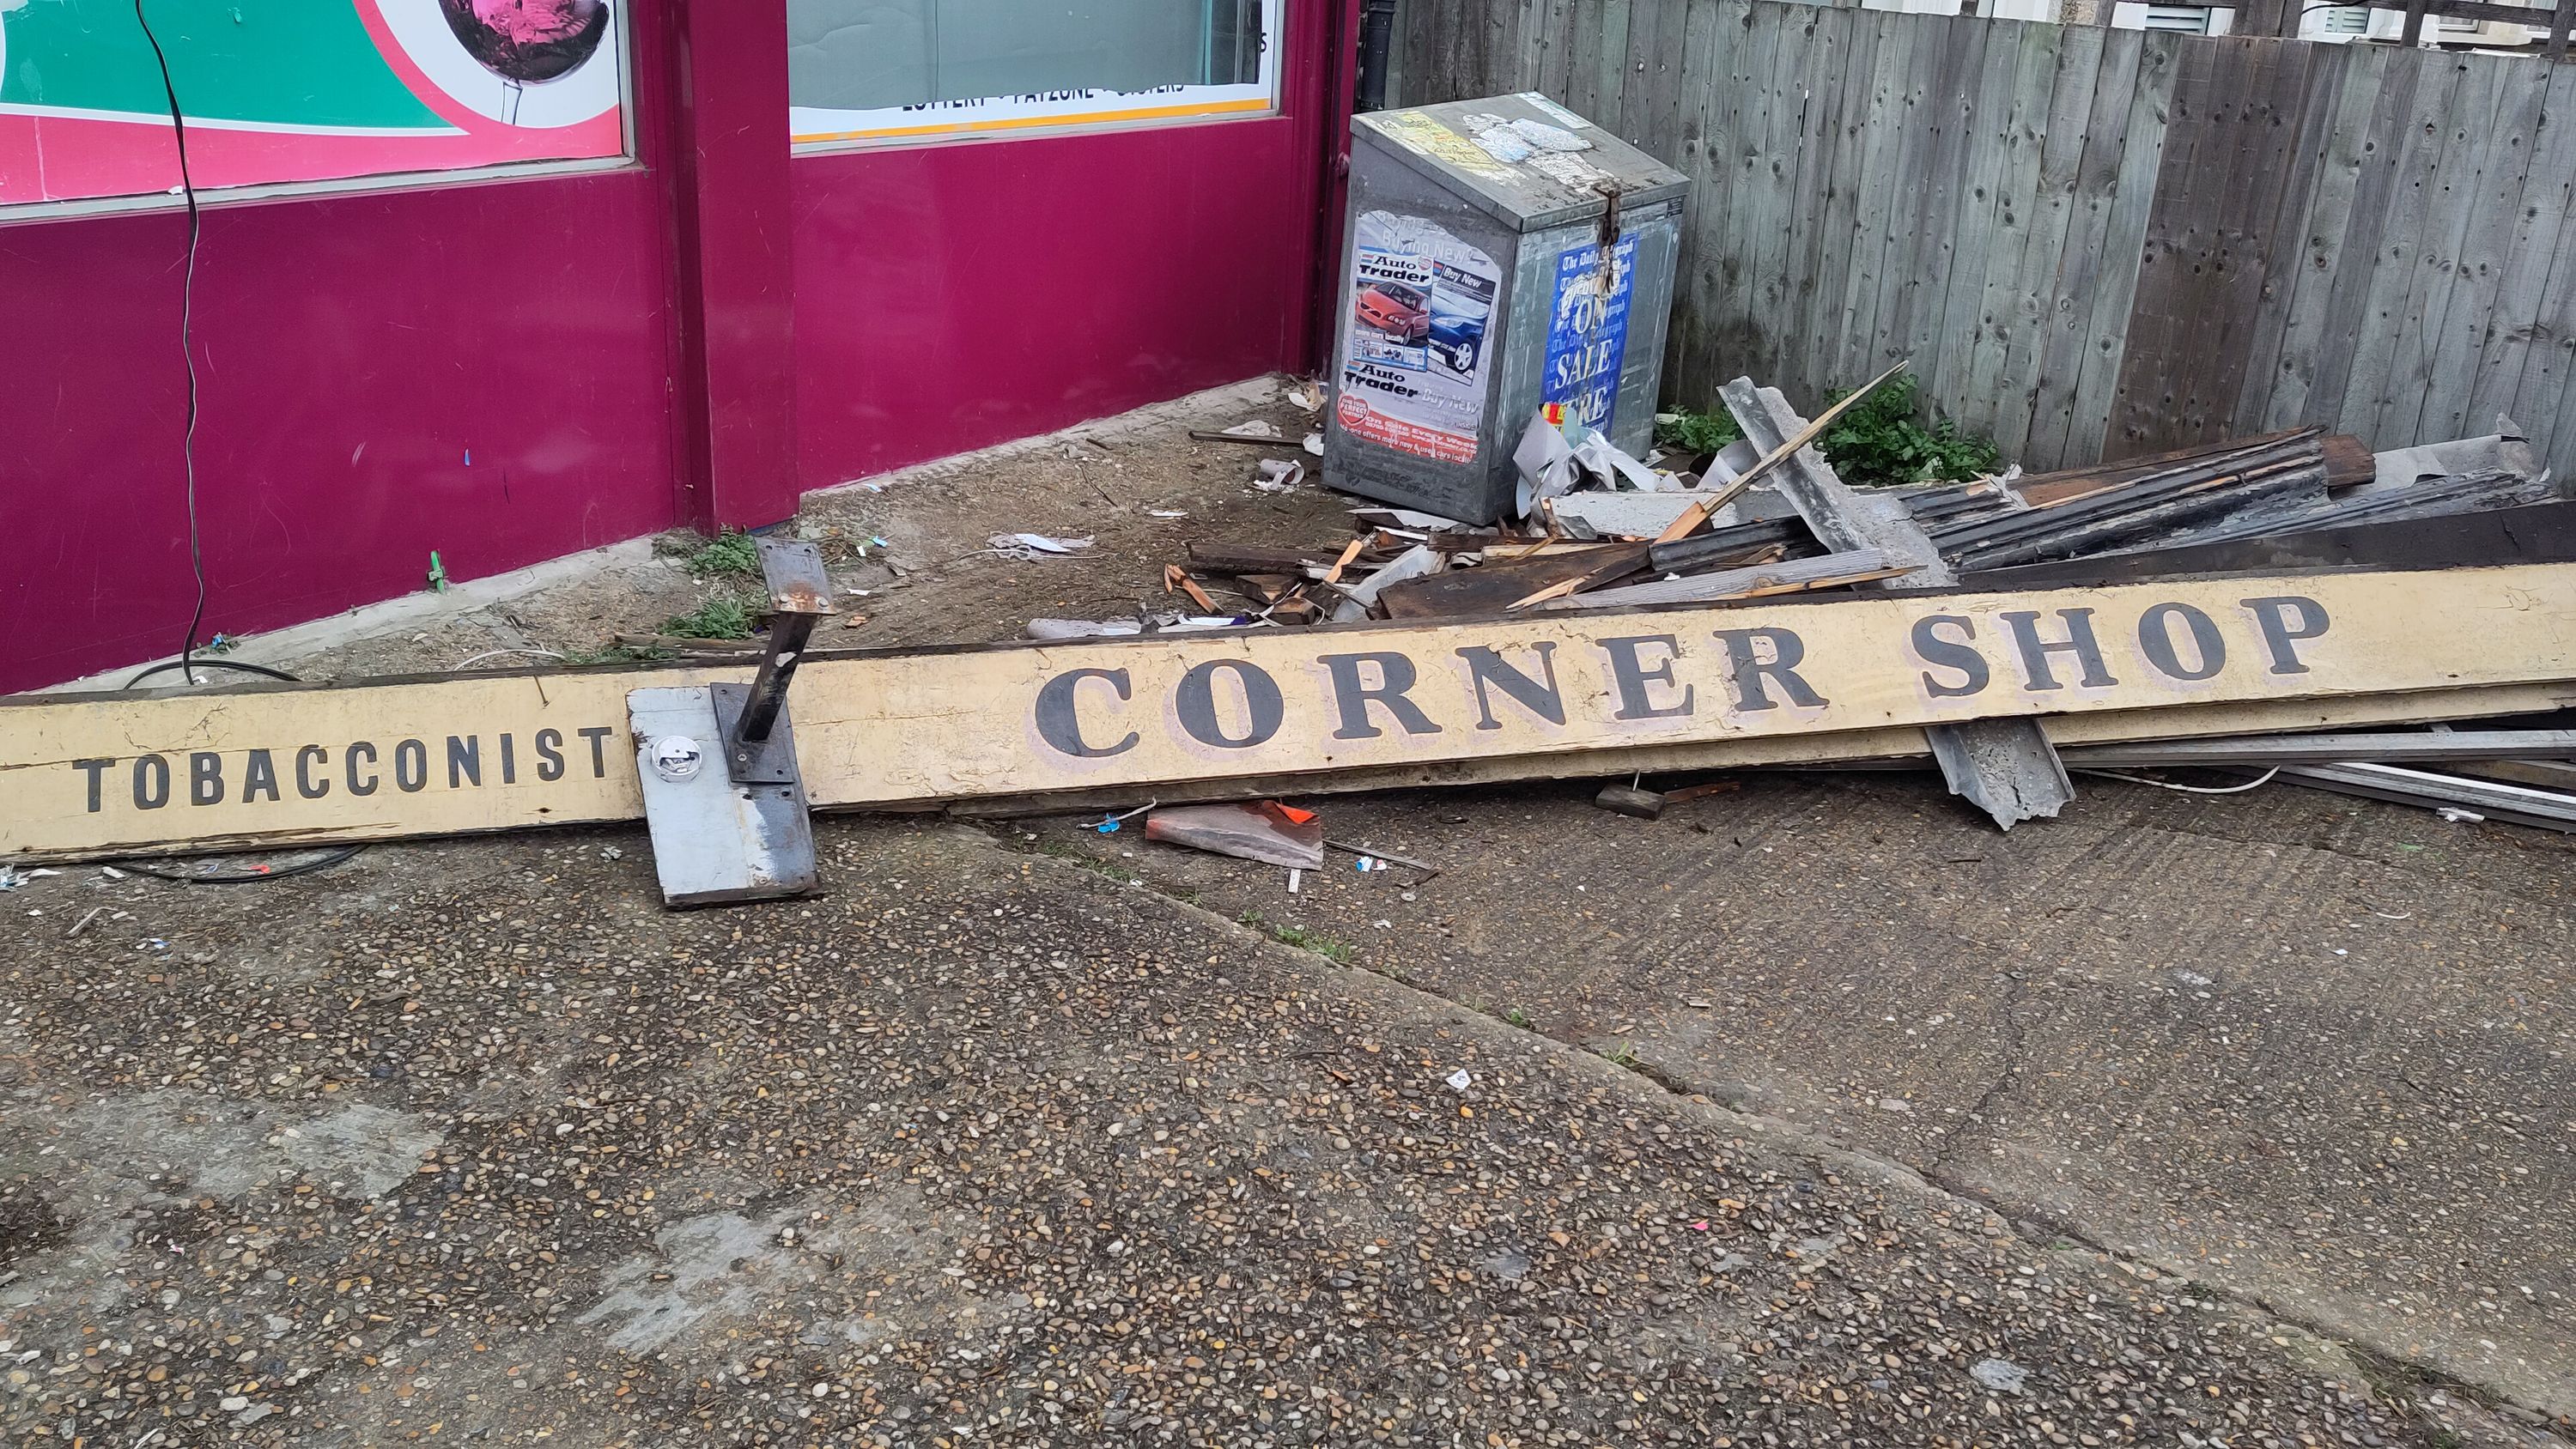 The cornershop was peeling back the layers during a renovation and torn out this cool old sign